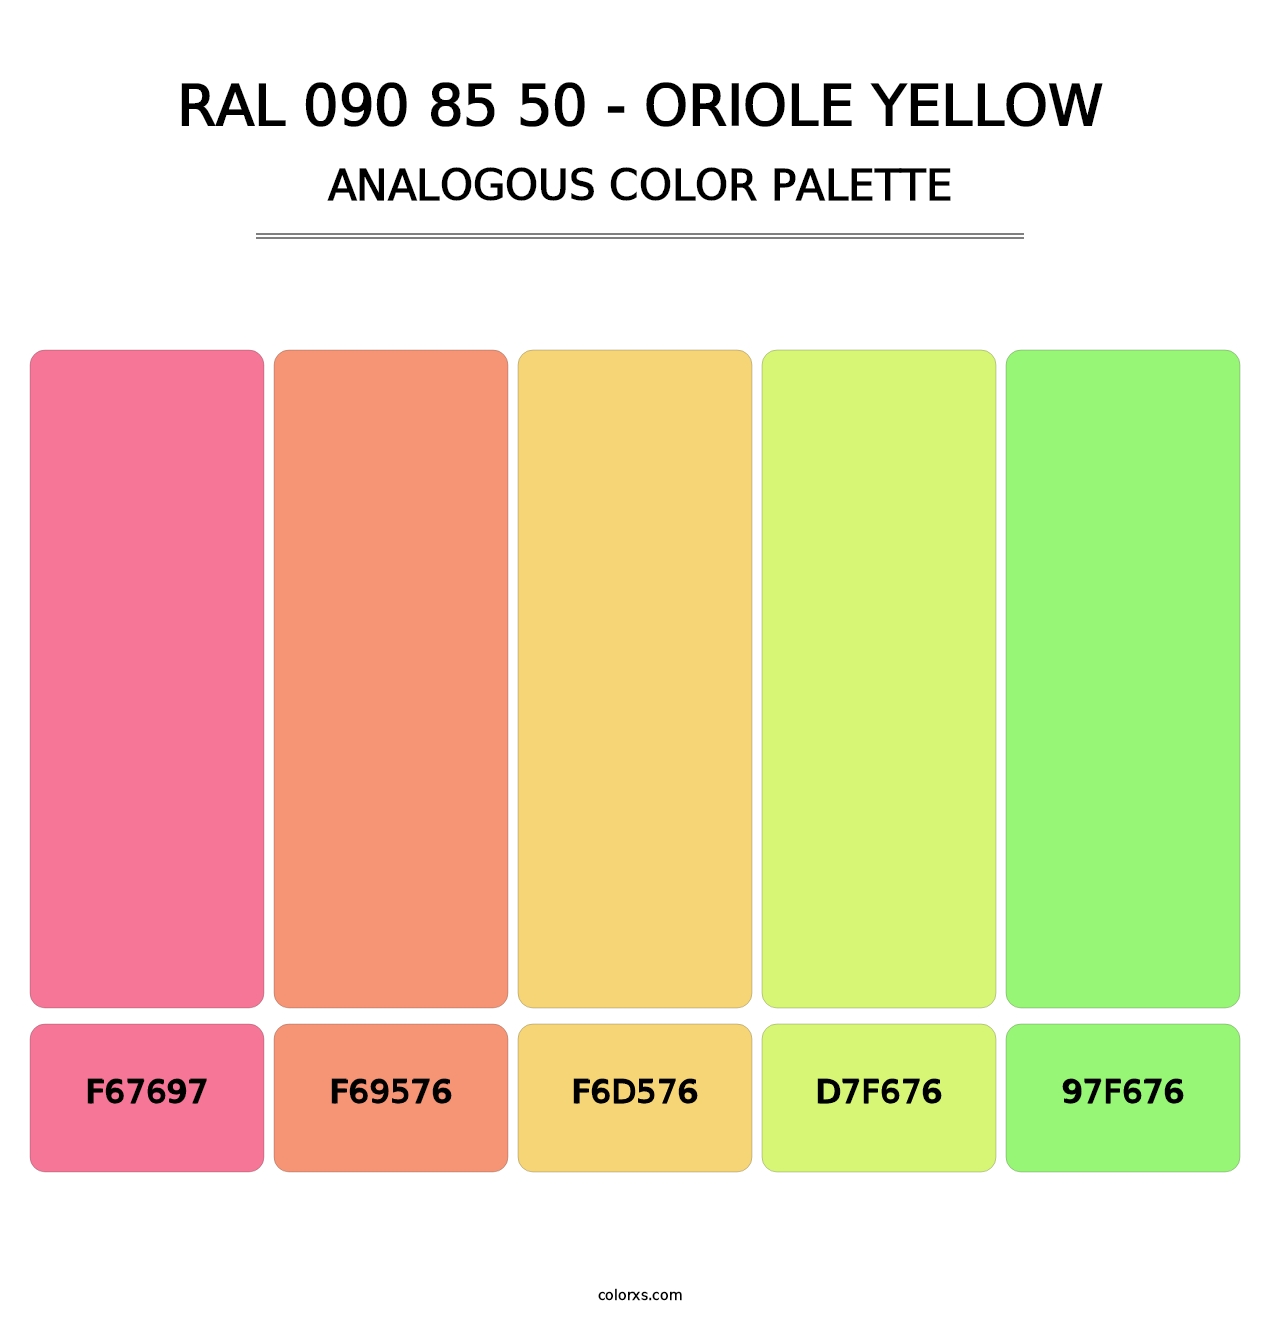 RAL 090 85 50 - Oriole Yellow - Analogous Color Palette